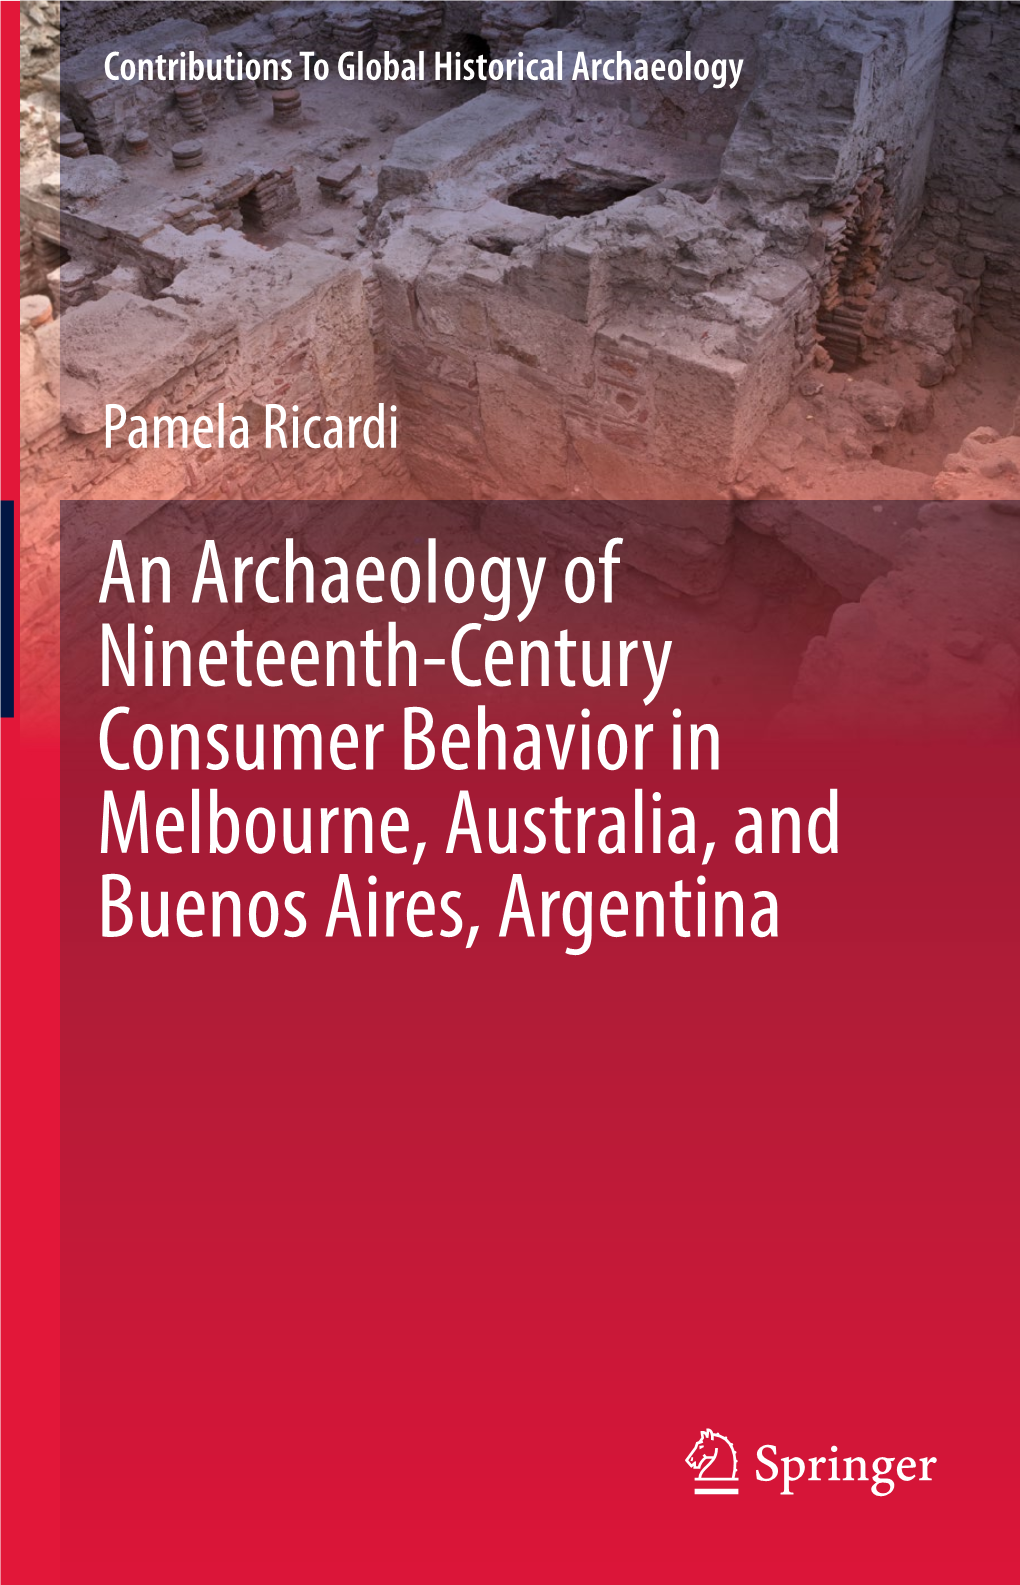 An Archaeology of Nineteenth-Century Consumer Behavior in Melbourne, Australia, and Buenos Aires, Argentina Contributions to Global Historical Archaeology